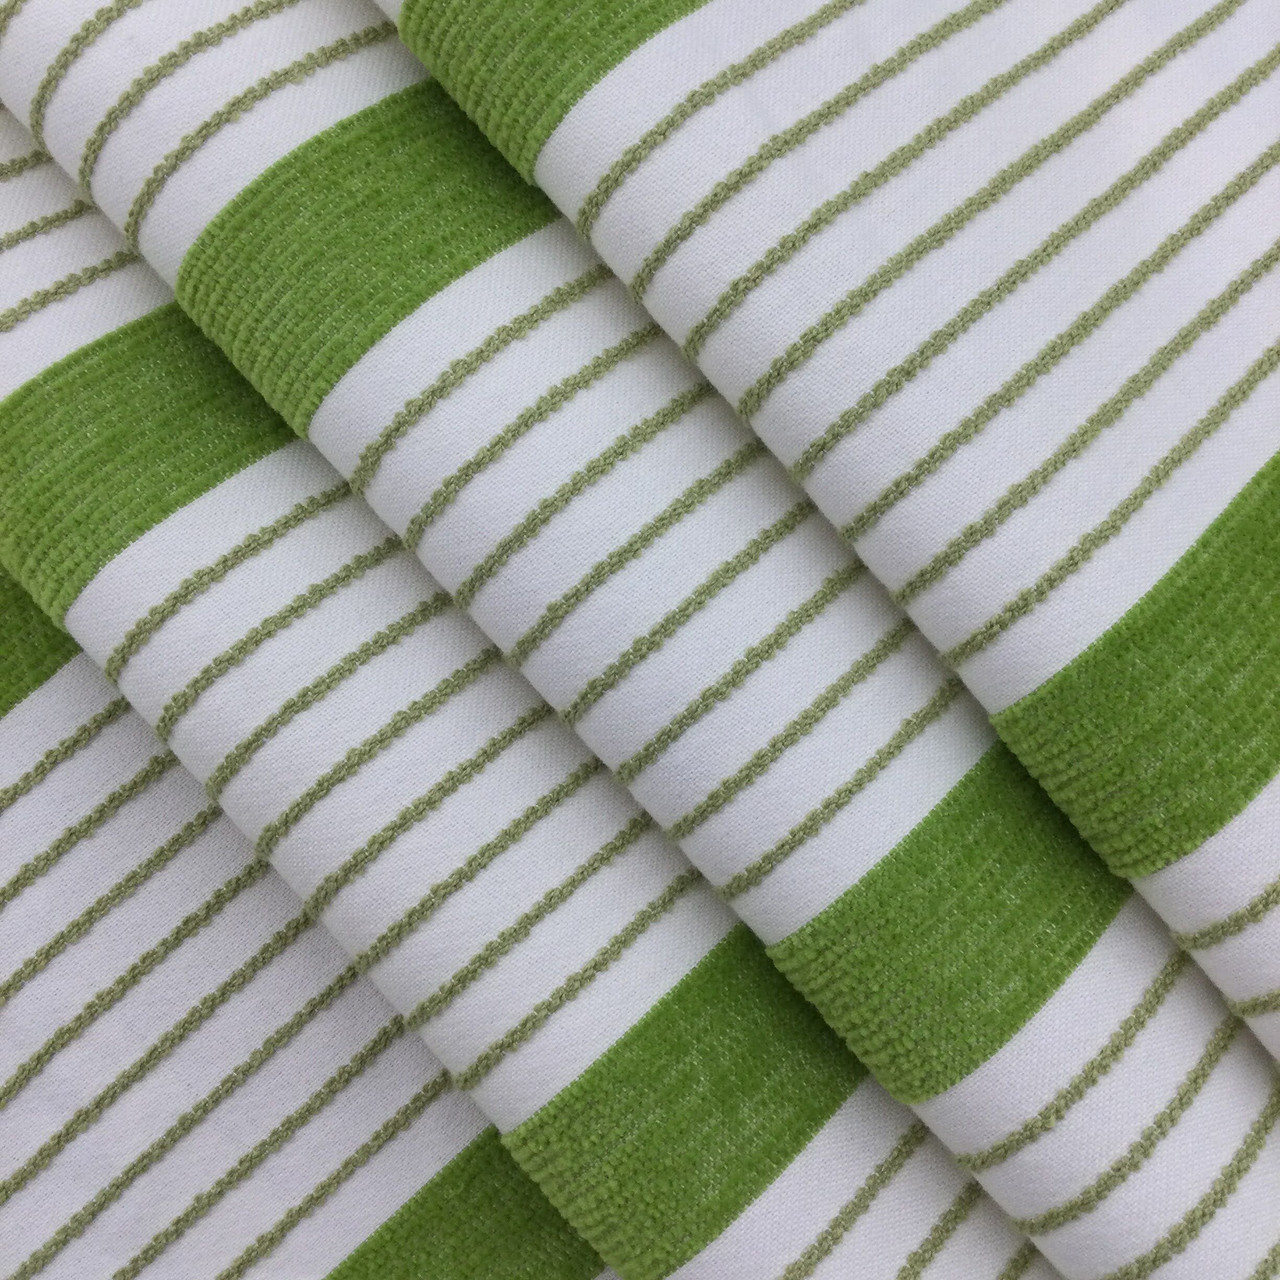 Heavy Weight Green Ticking Stripes Cotton Fabric By-The-Yard Quantity  Discounts